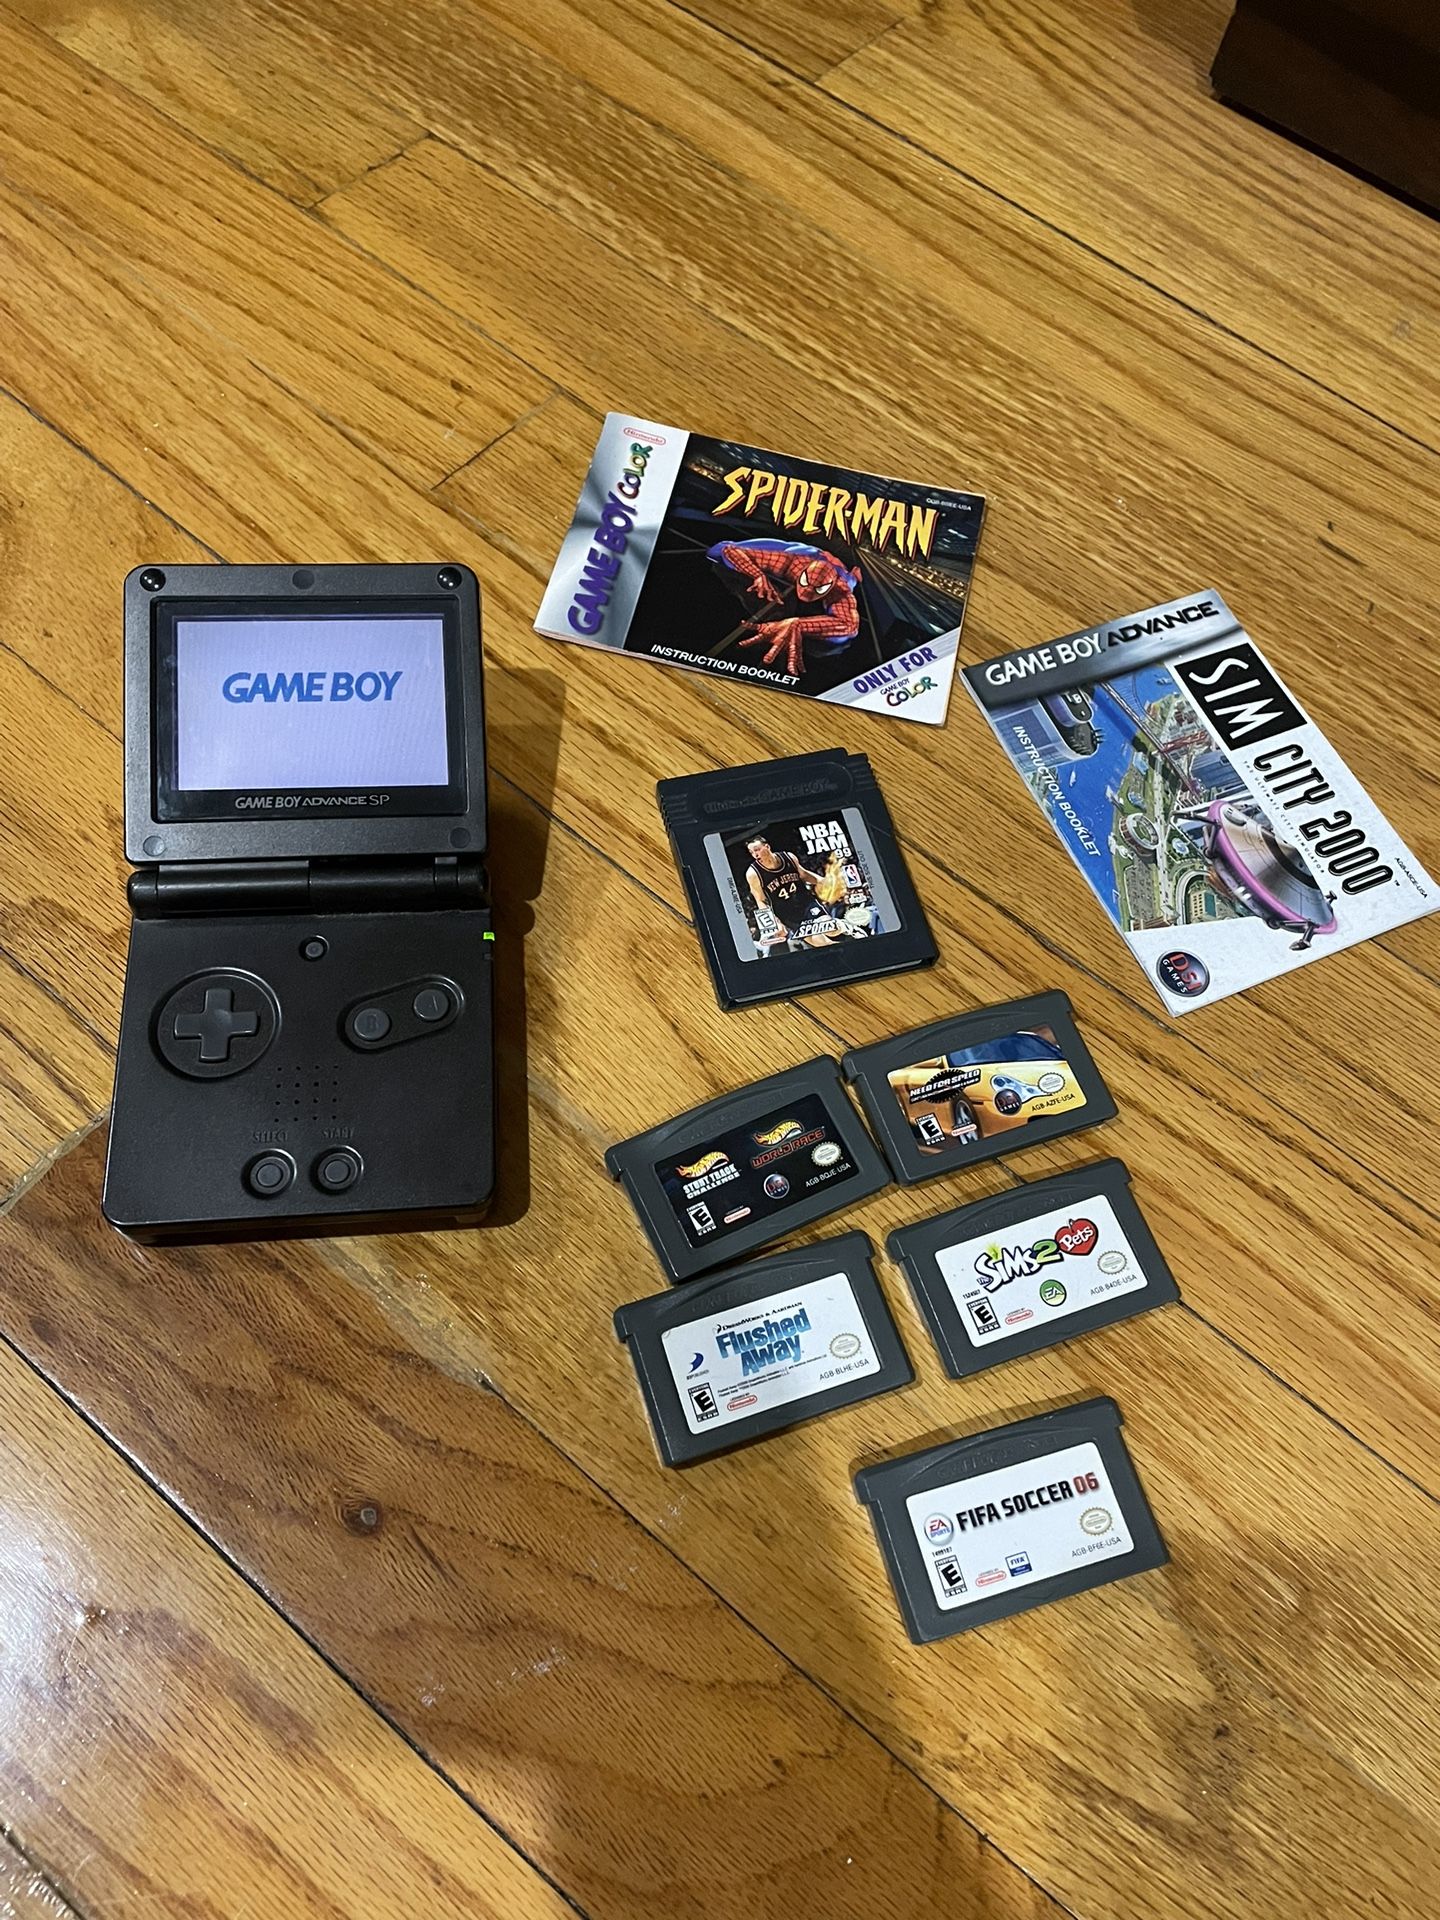 Gameboy Advance With Games - No Charger